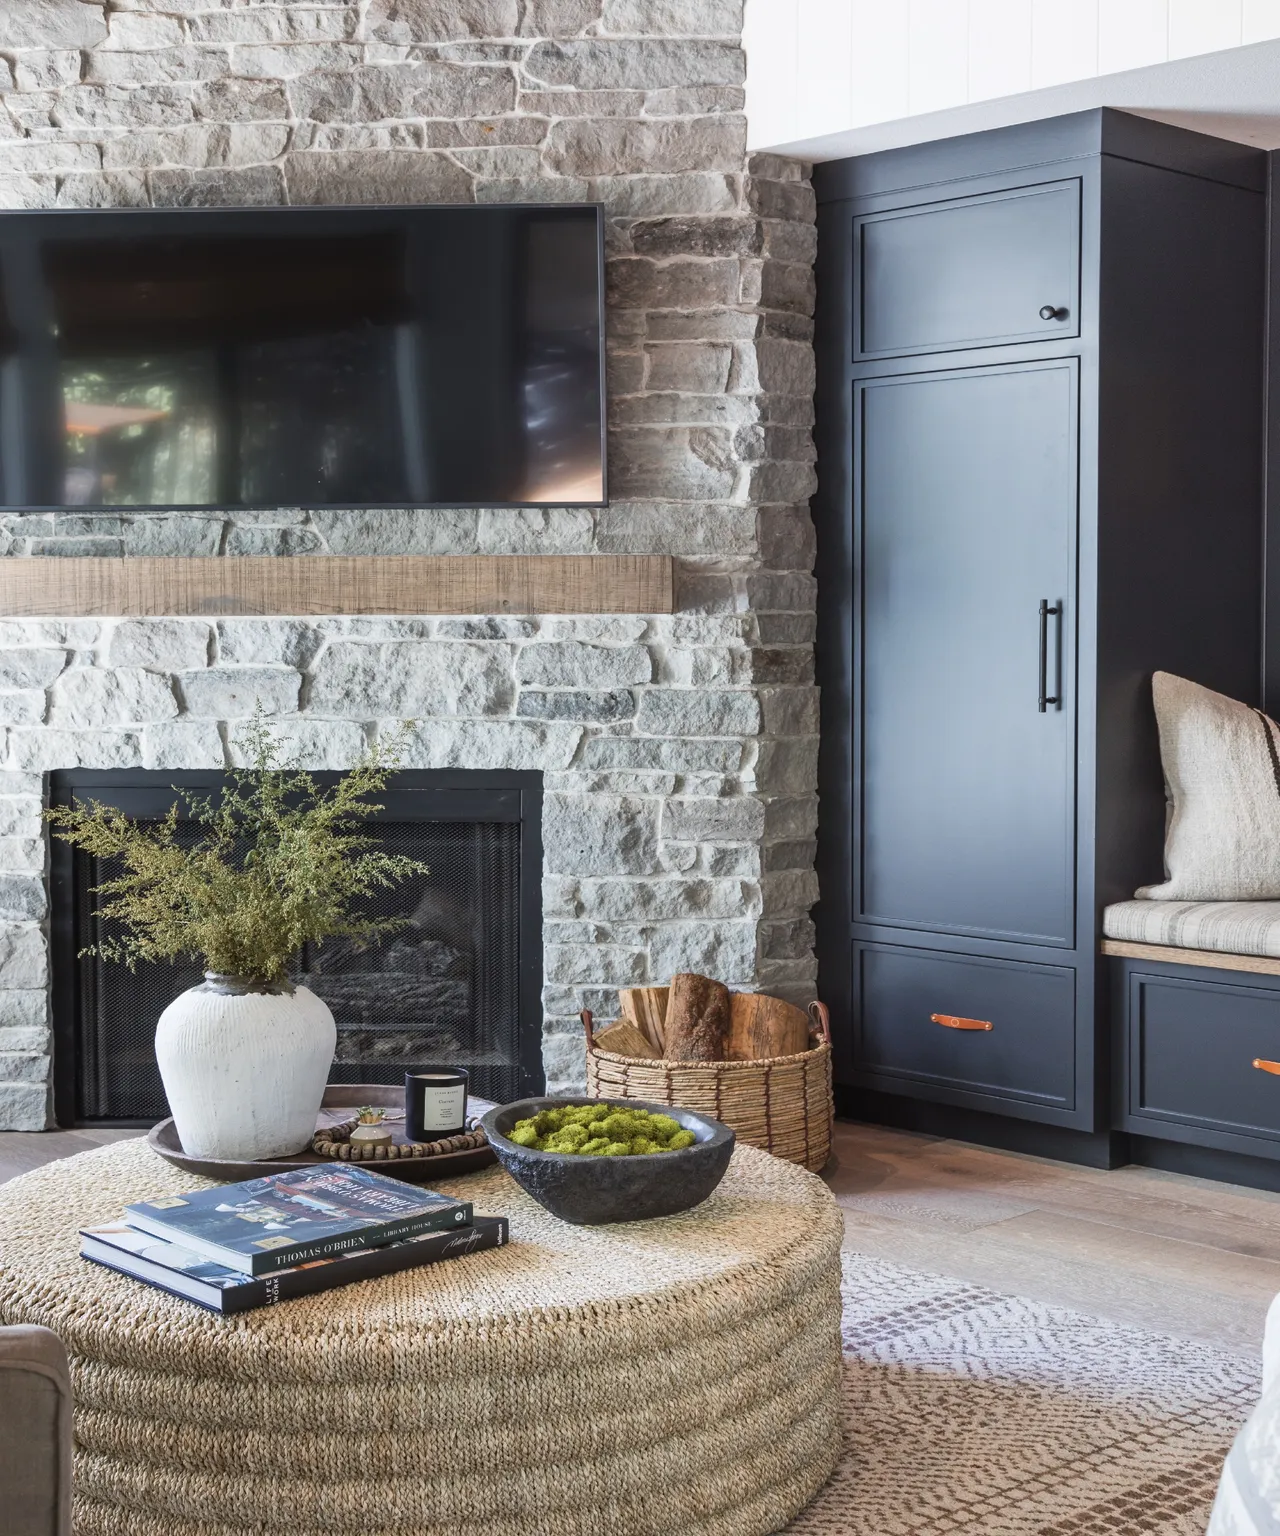  Cozy Corner Fireplace Ideas to Bring Warmth to Your Space - Dive into my guide for creating a stunning corner fireplace that's all about cozy vibes and style. I've got the tips and ideas to make your space warm, welcoming, and oh-so-chic.